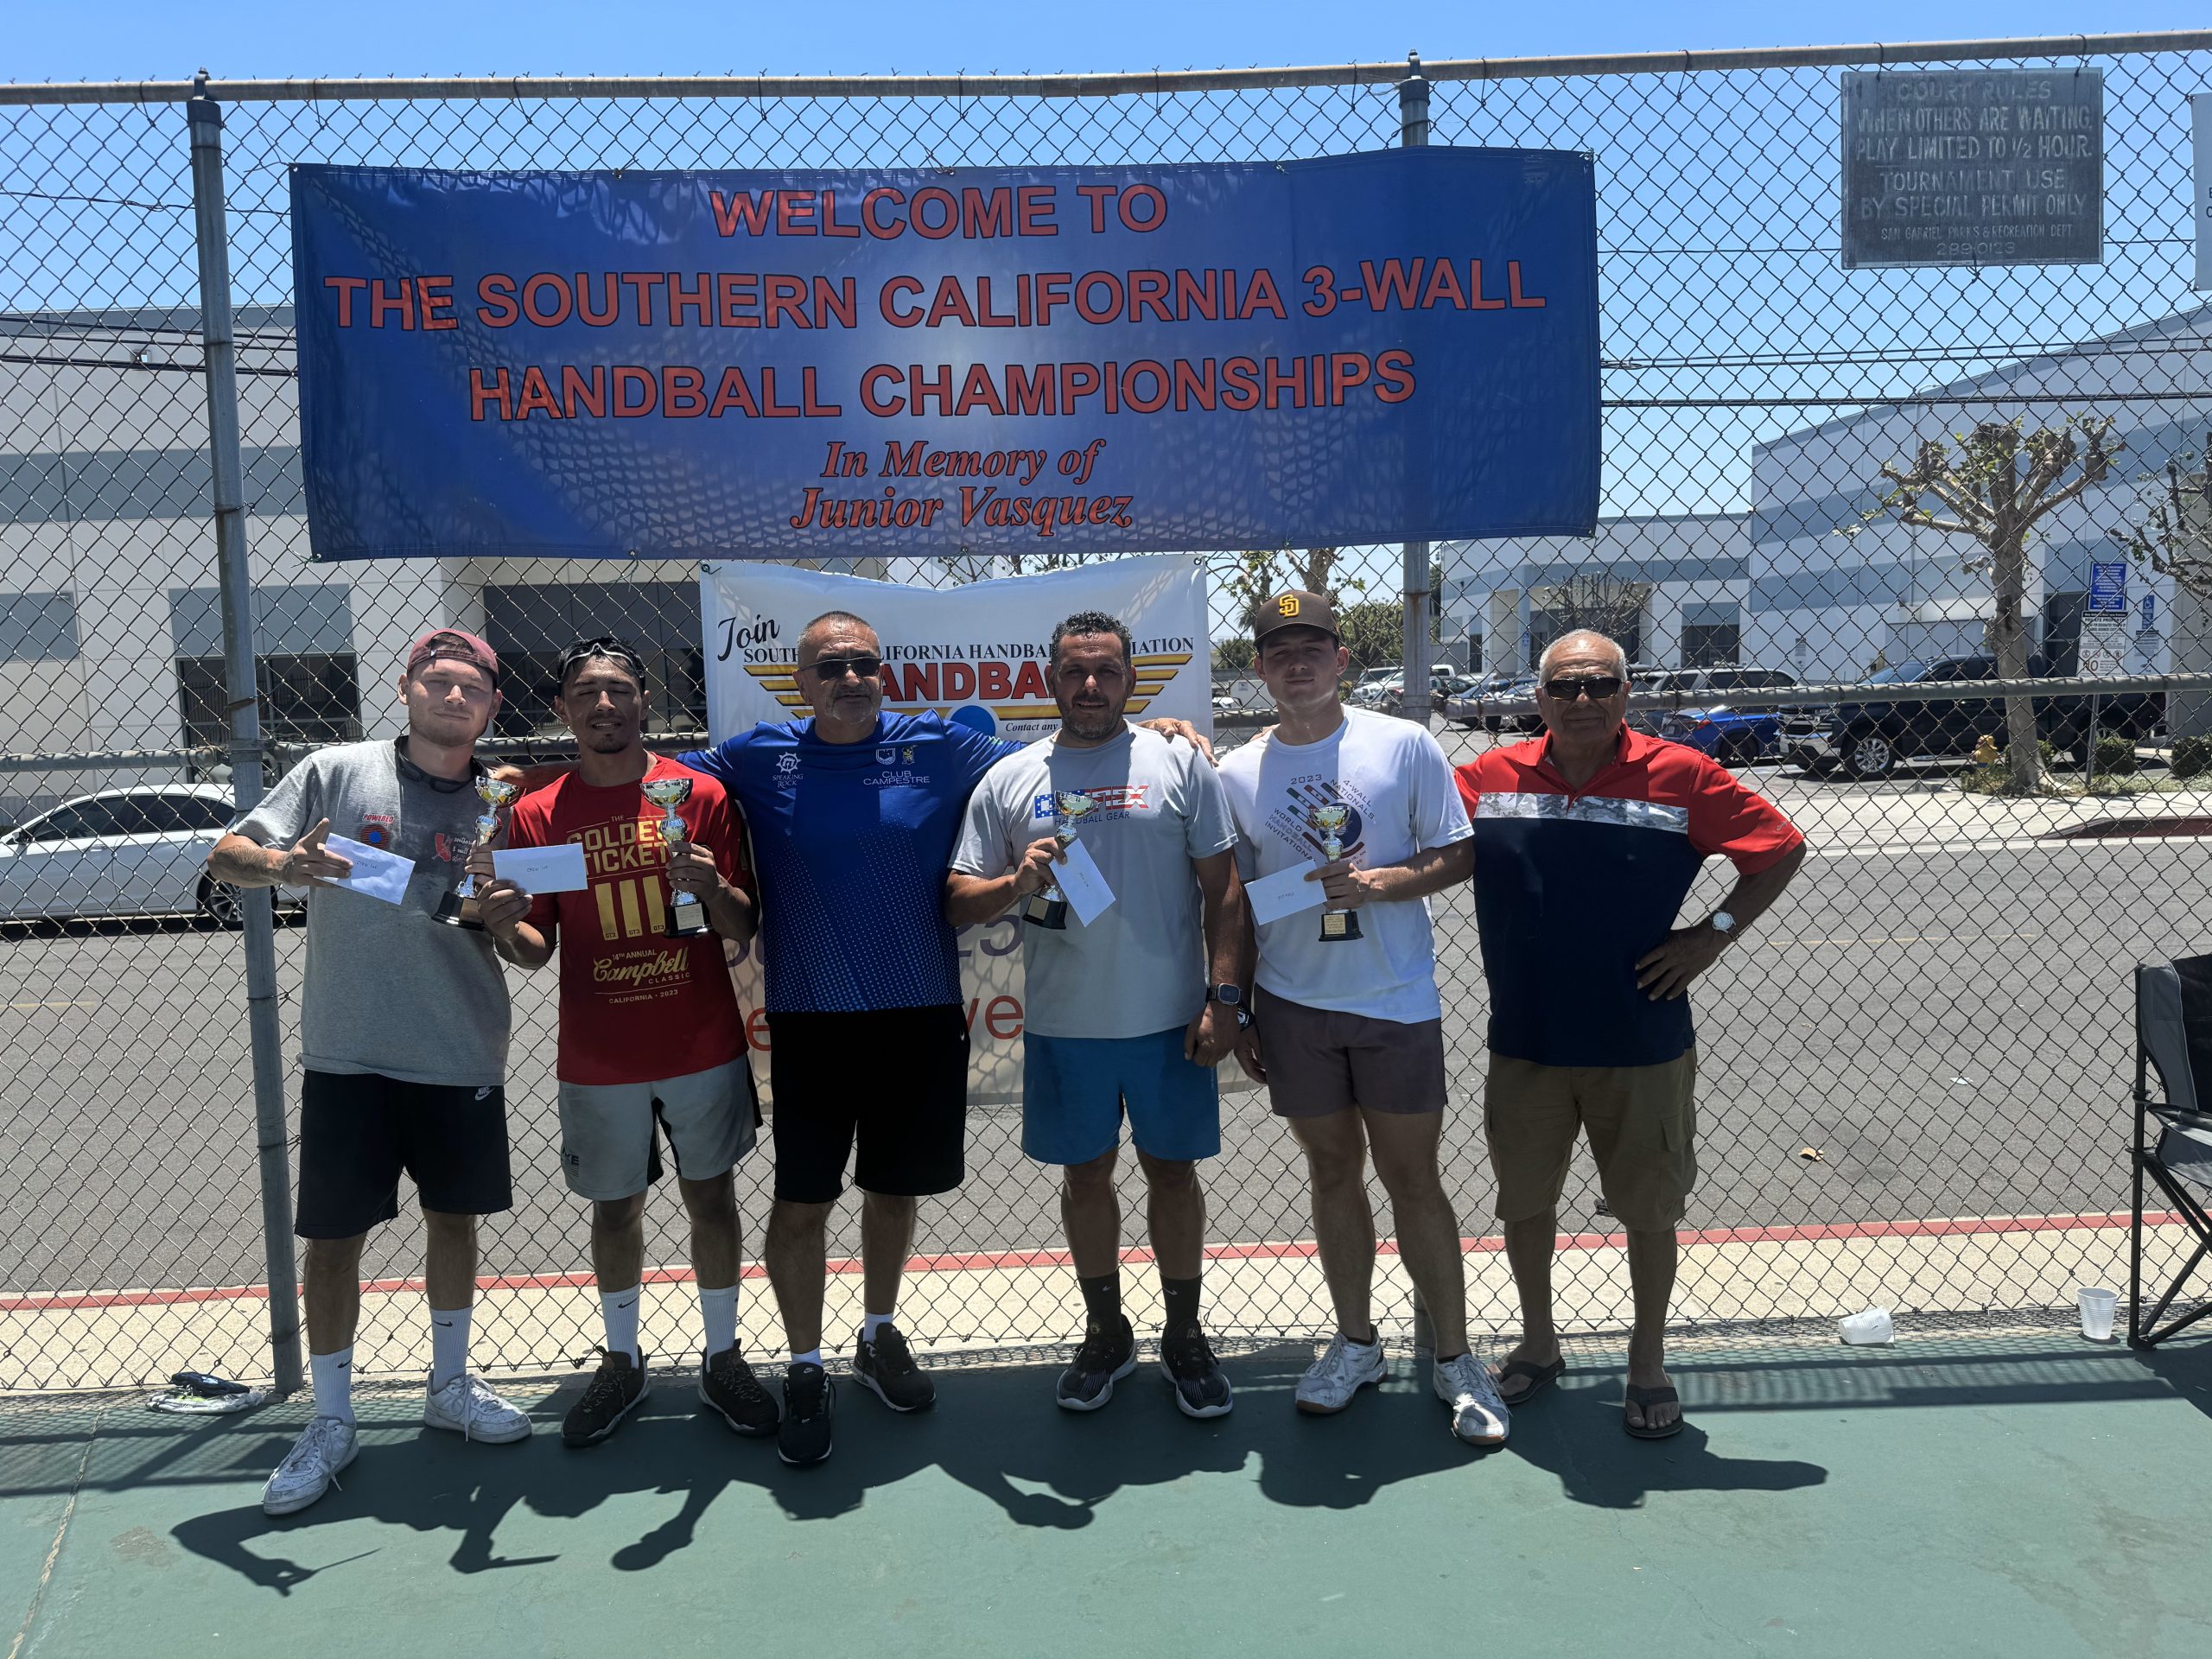 Chava and Chapa Take the 19th Annual Jr. Vasquez Southern CA 3-Wall State Doubles Championships